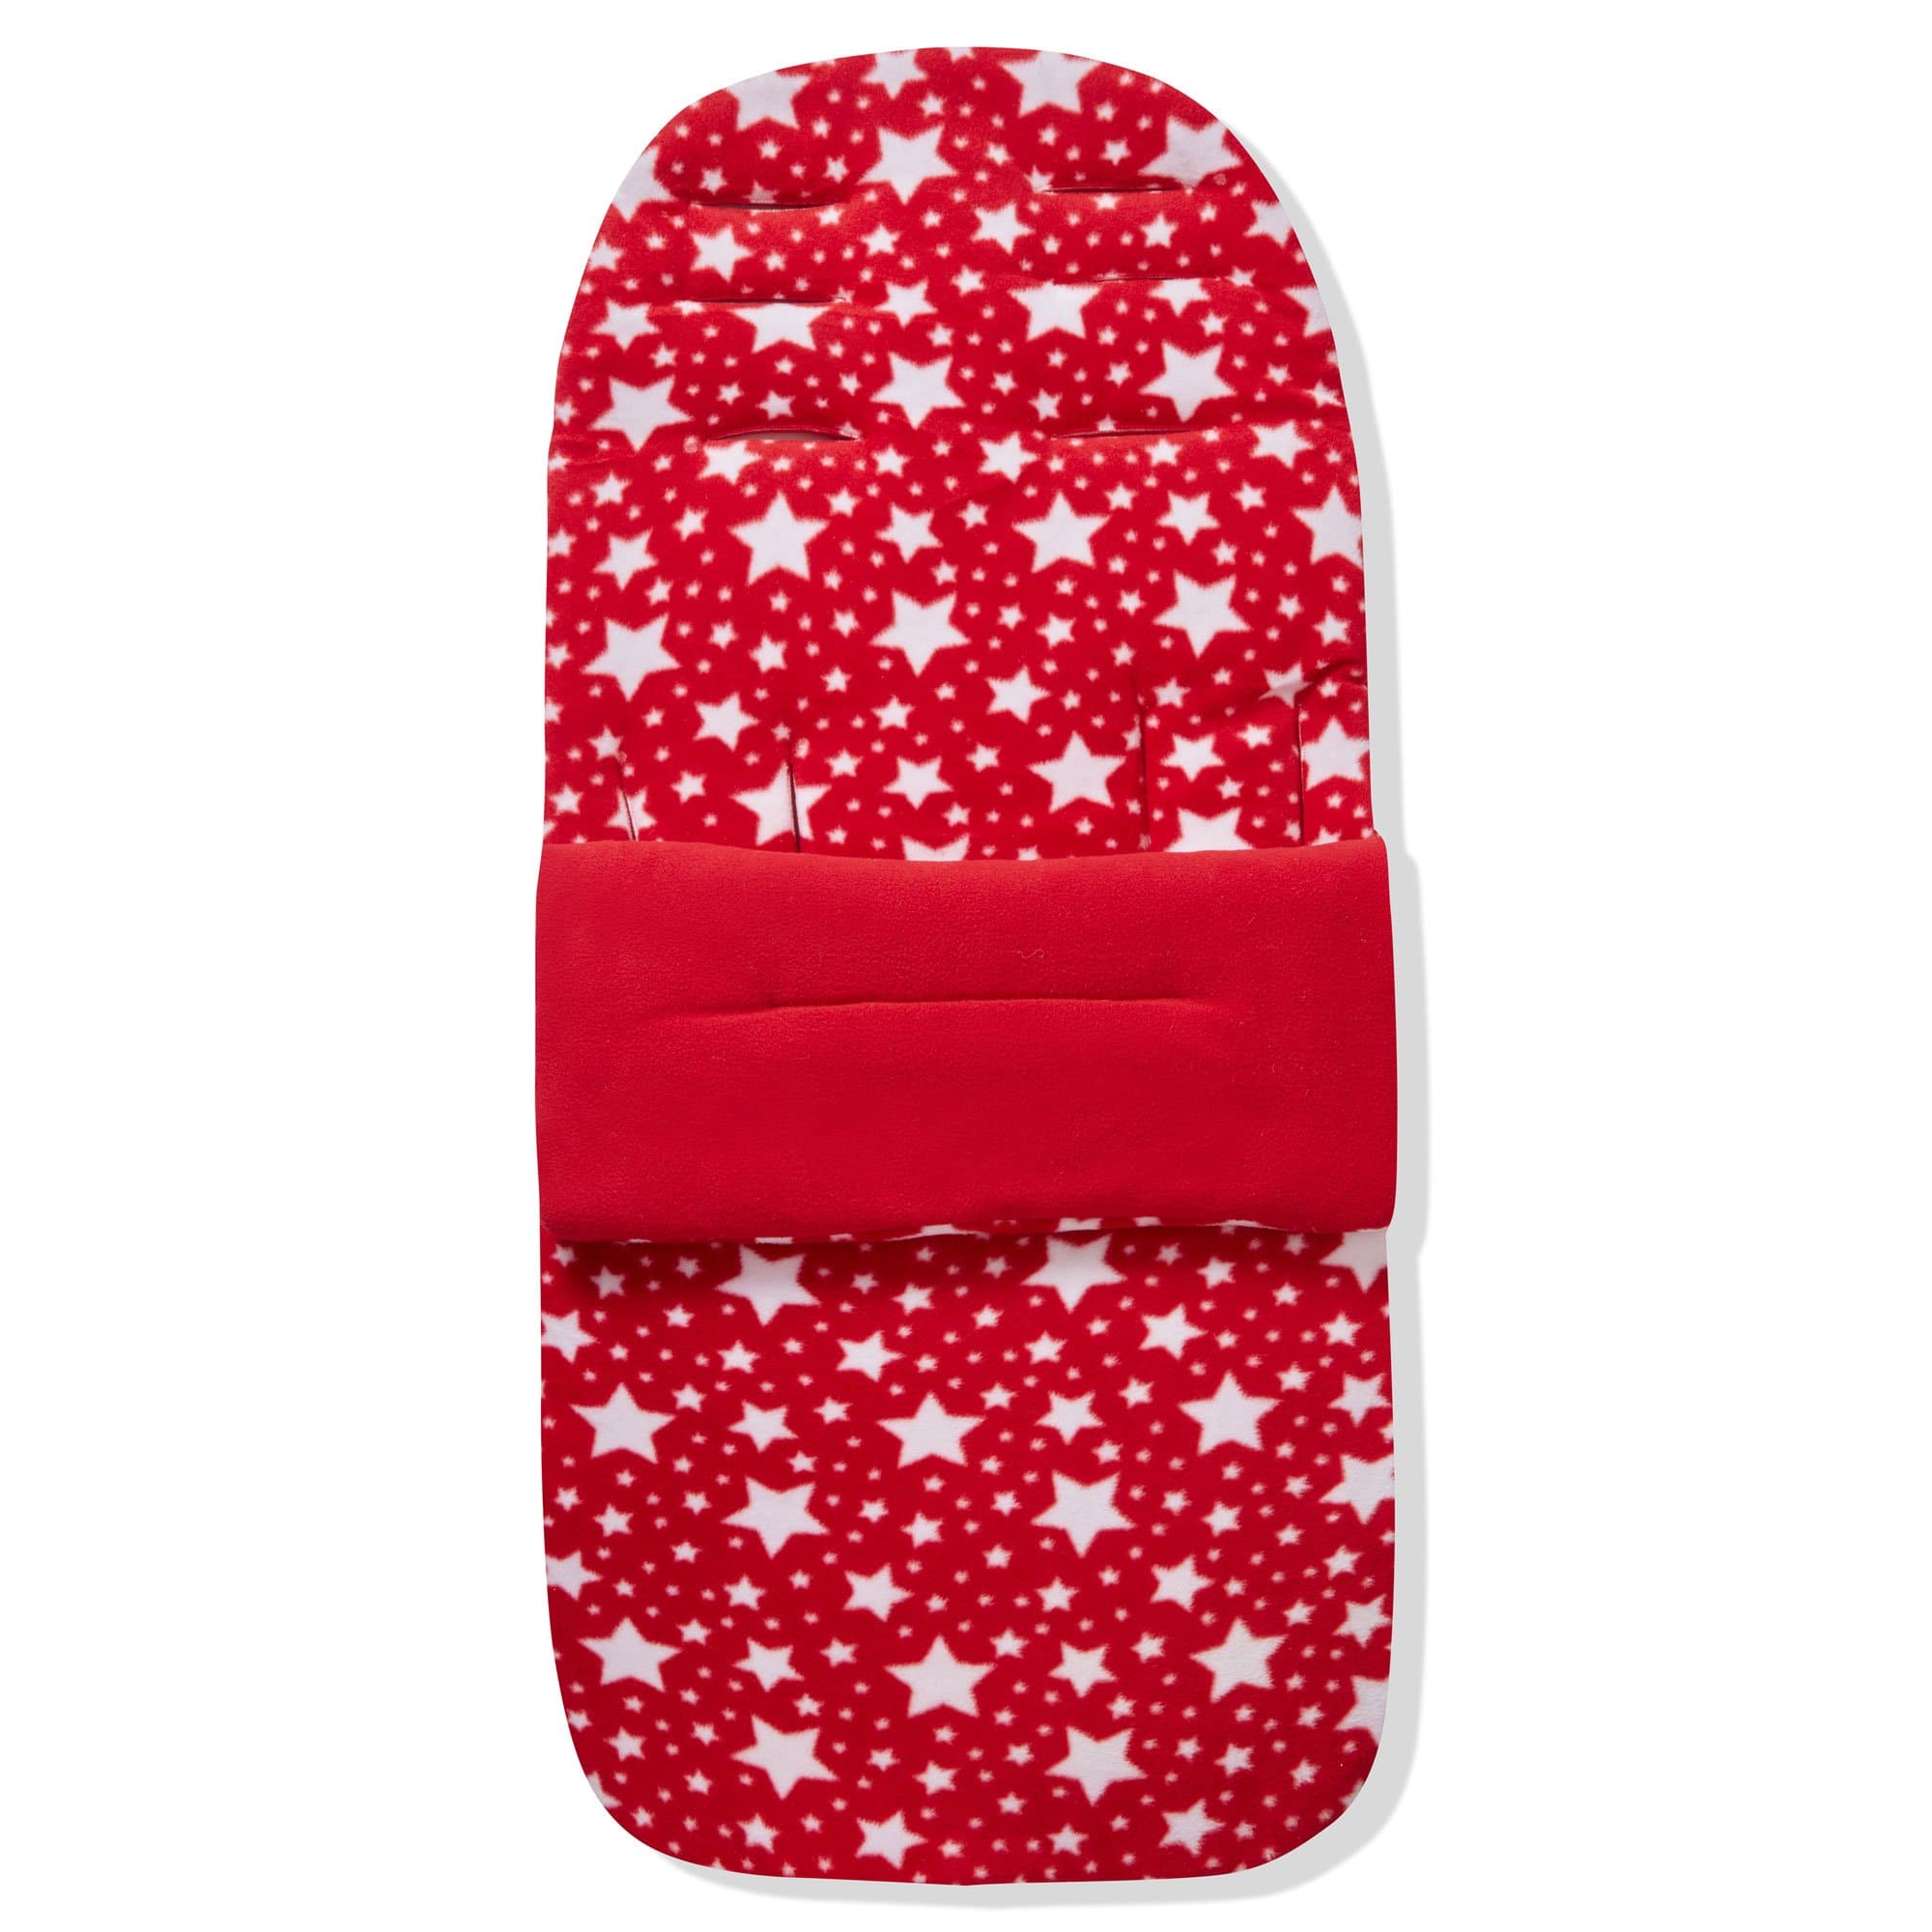 Fleece Footmuff / Cosy Toes Compatible with Emmaljunga - Red Star / Fits All Models | For Your Little One